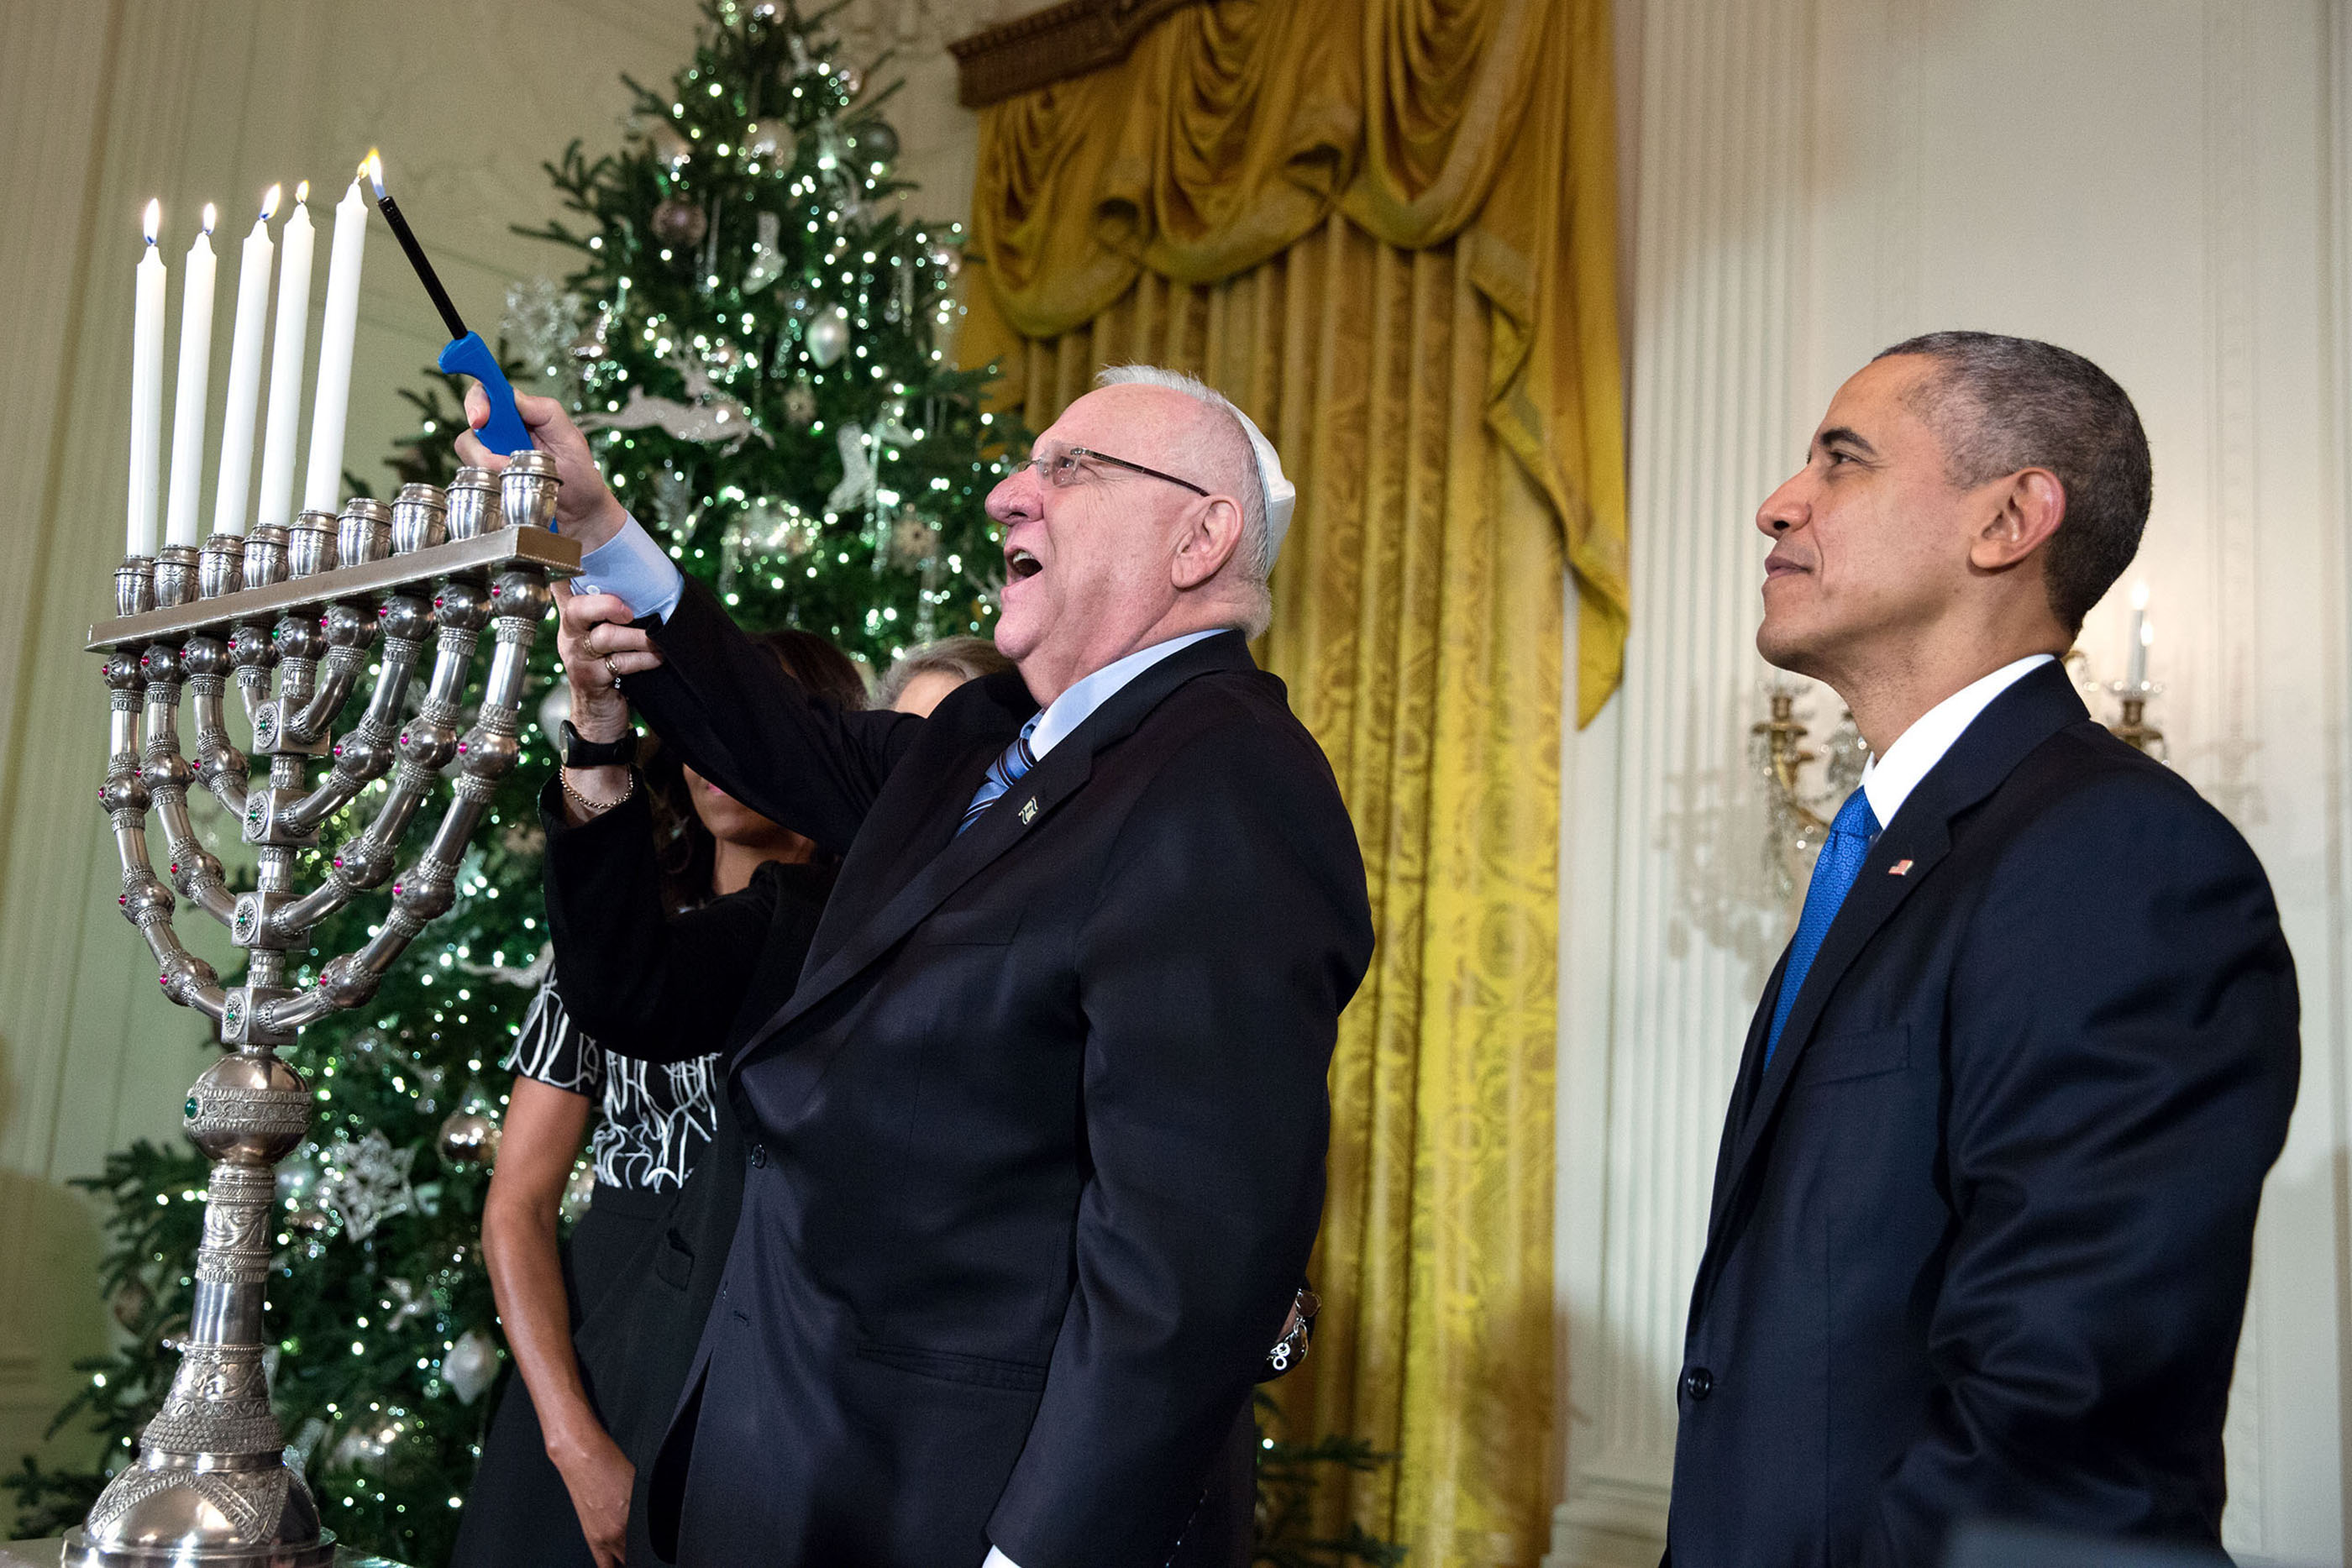 President Barack Obama and First Lady Michelle Obama watch as President Reuven Rivlin of Israel and Mrs. Nechama Rivlin light the menorah during Hanukkah reception #1 in the East Room of the White House, Dec. 9, 2015. (Official White House Photo by Amanda Lucidon)